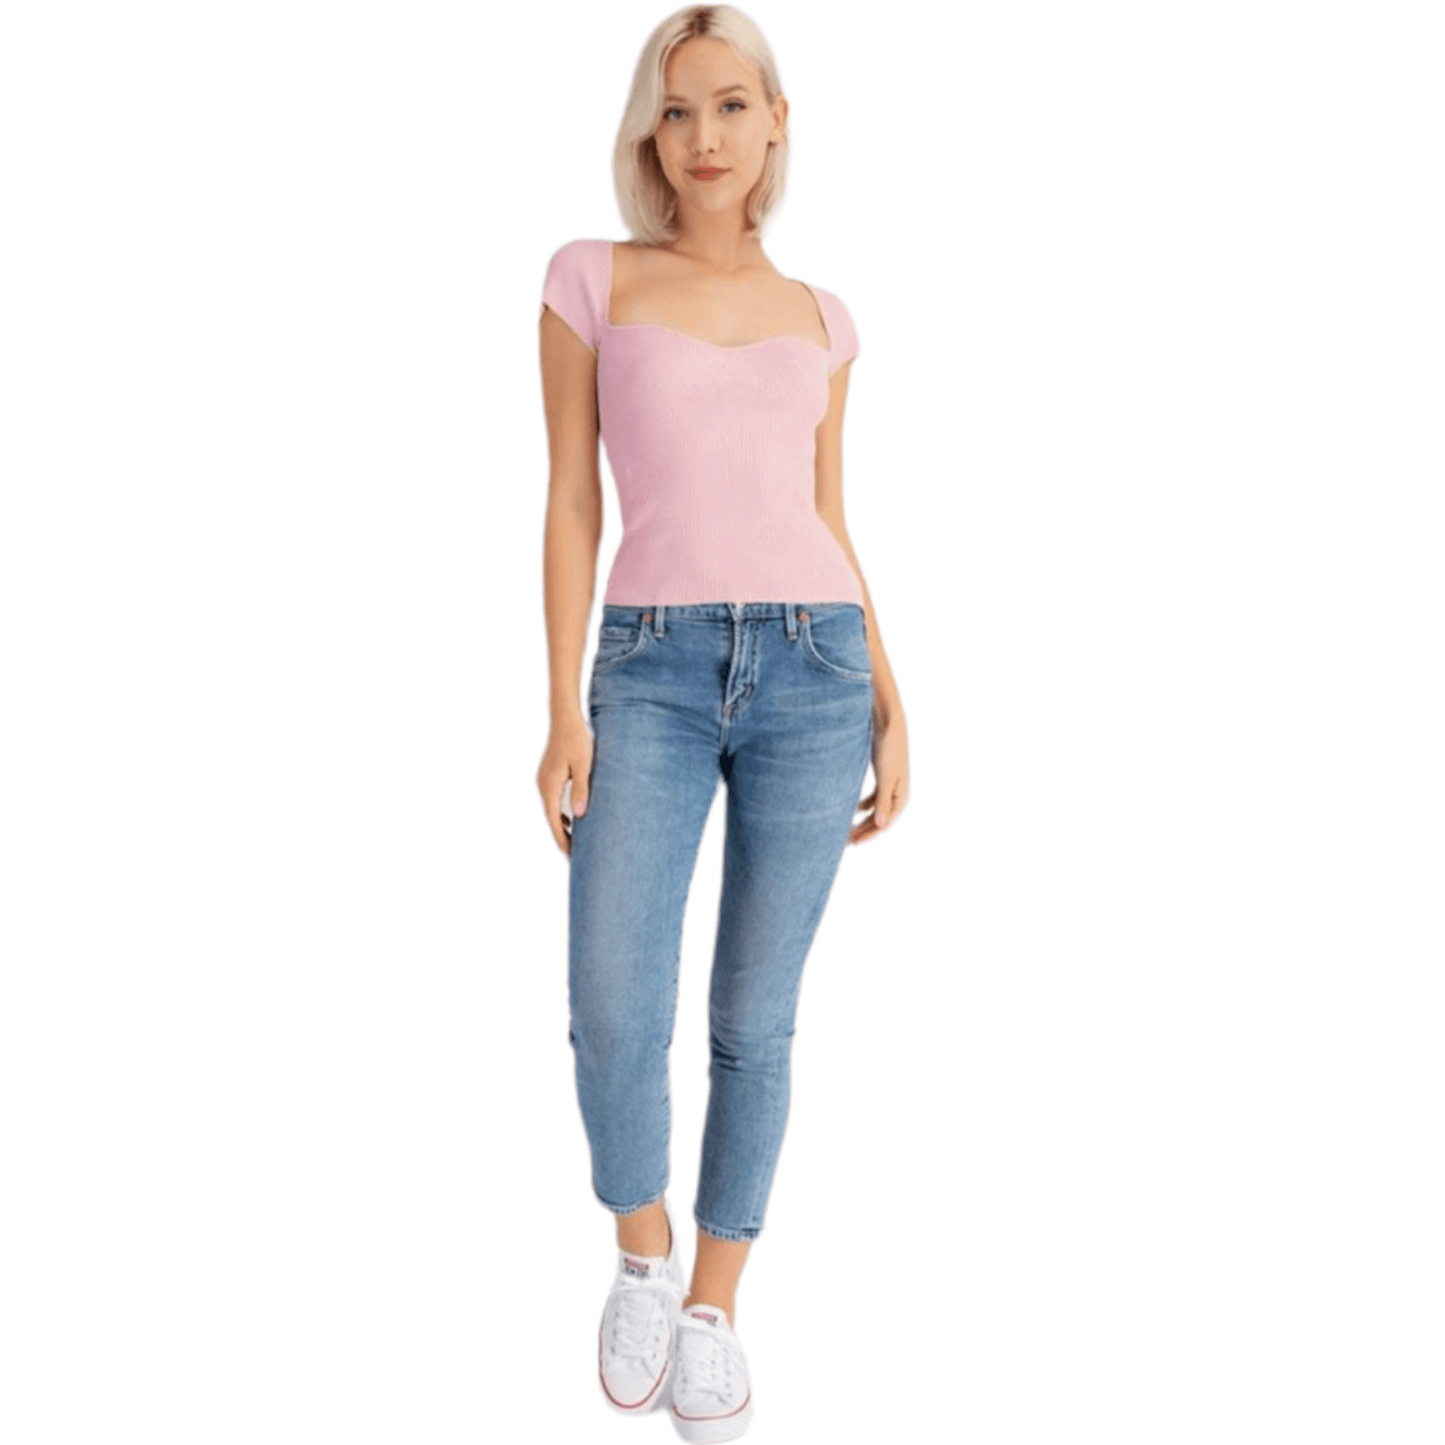 Sydney casual tee - guavaberry